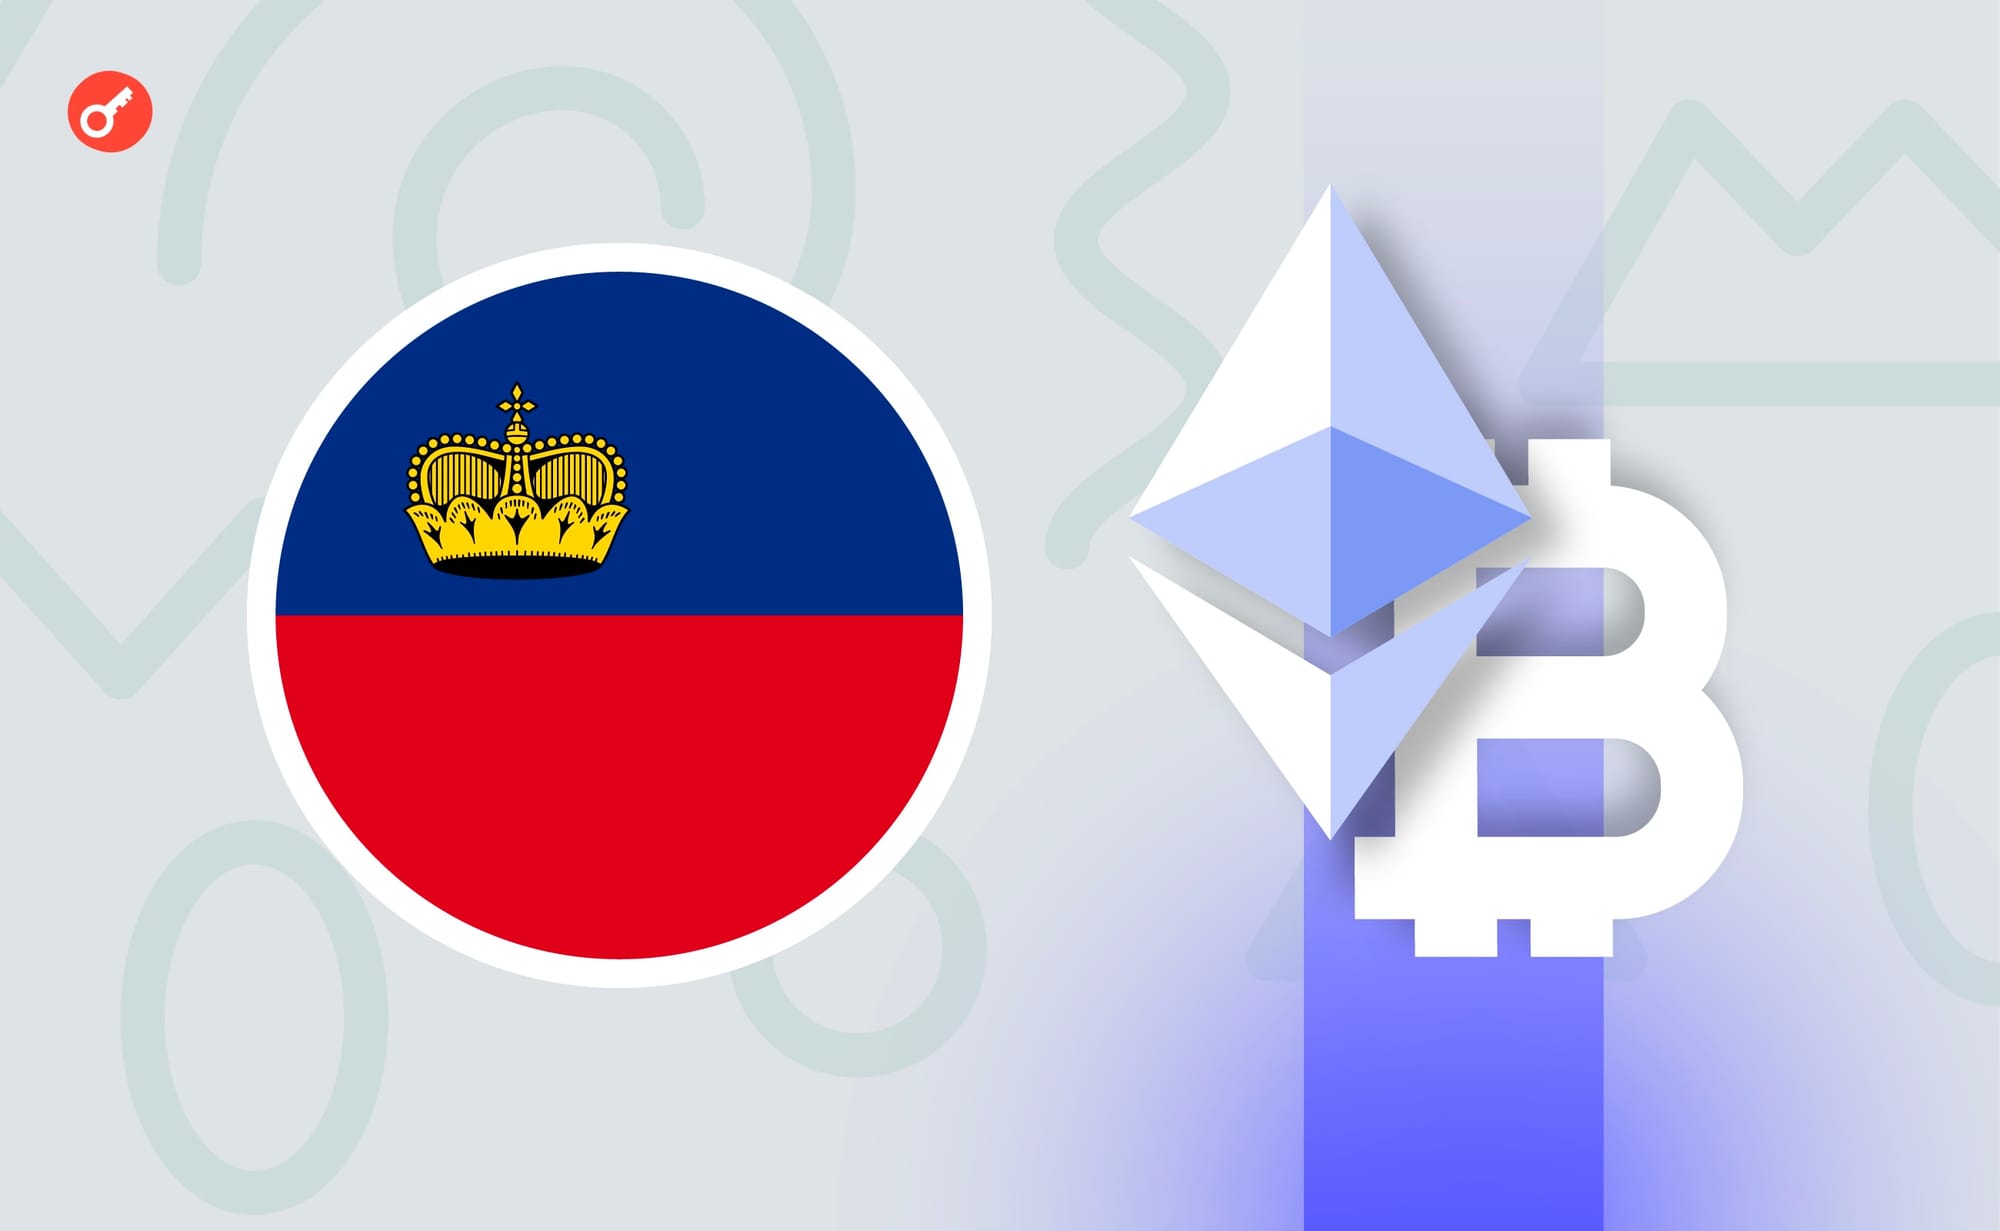 Liechtenstein has started accepting Bitcoin and Ethereum to pay for public services